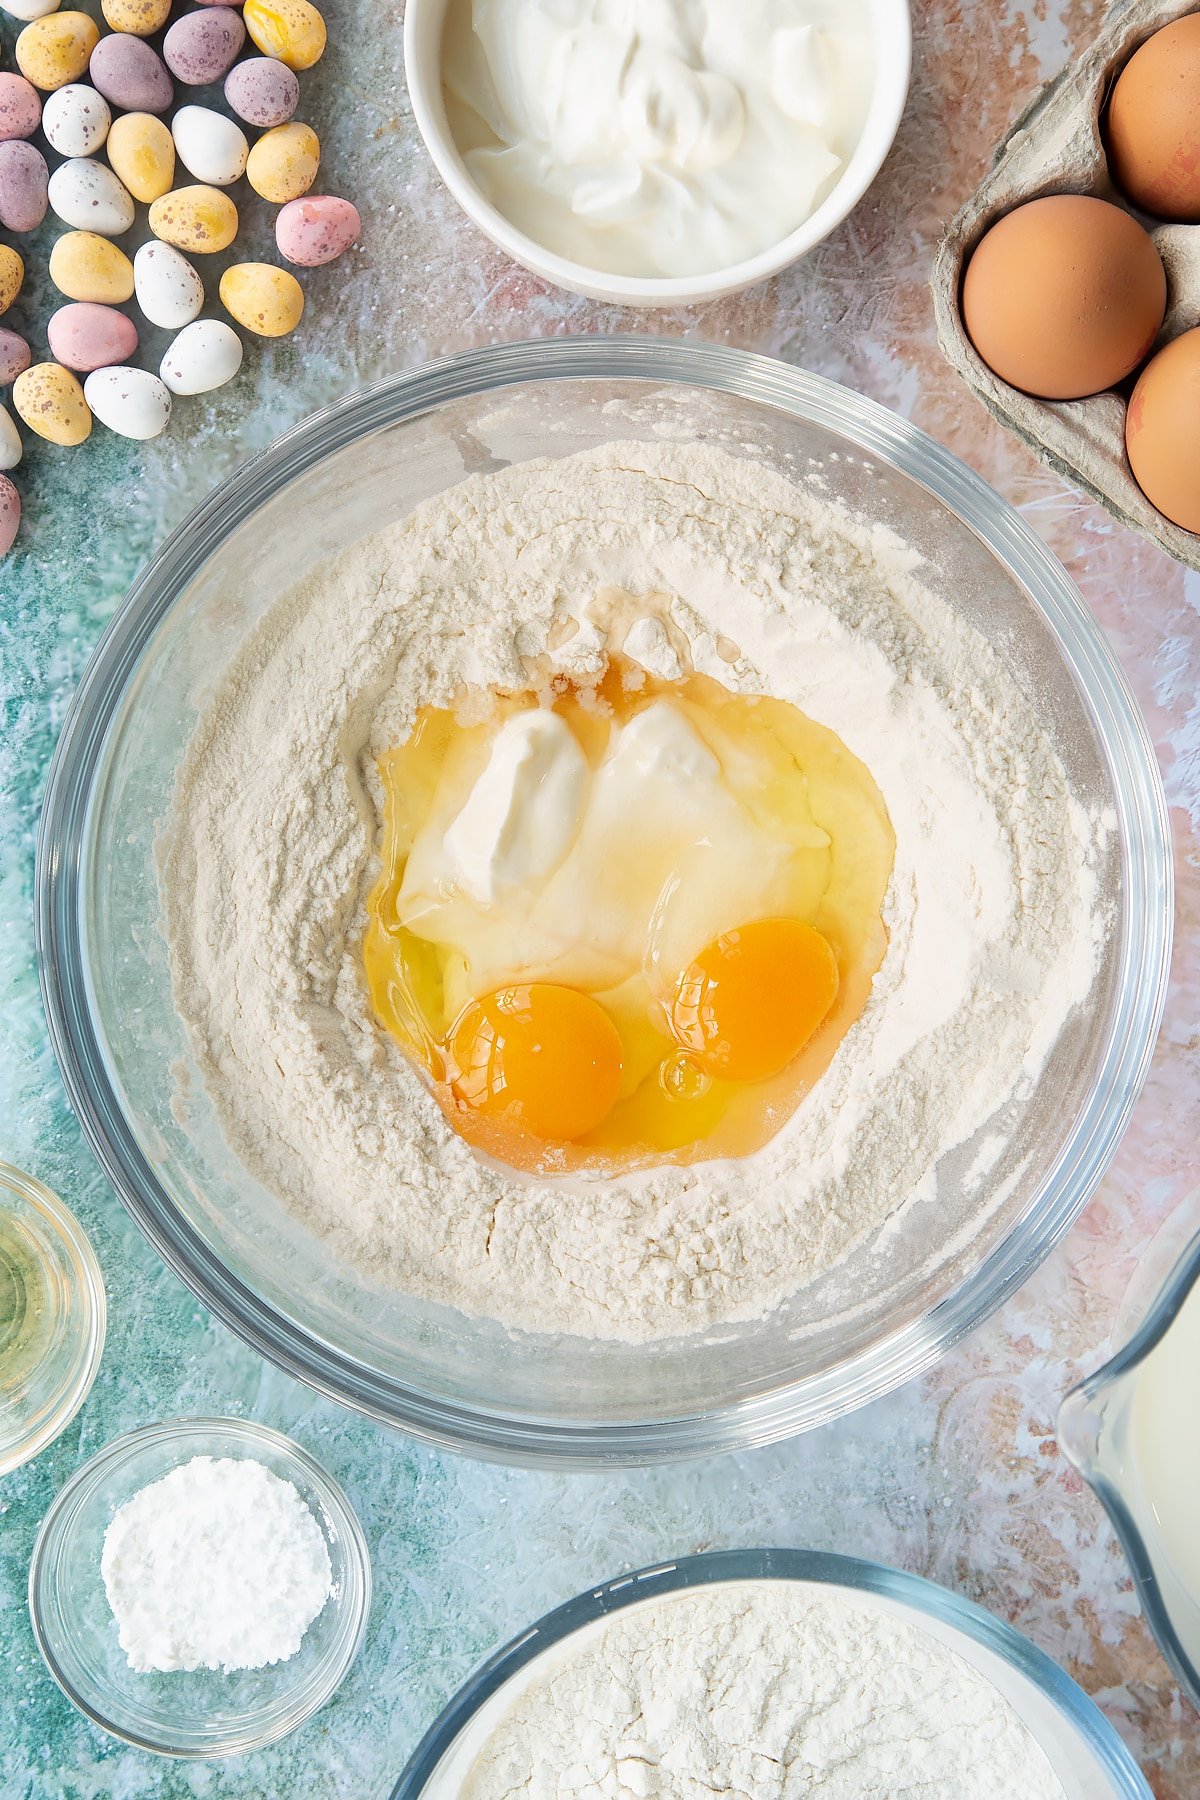 Flour and baking powder in a bowl with a well in the centre filled with creme fraiche and eggs. Ingredients to make Mini Egg pancakes surround the bowl.